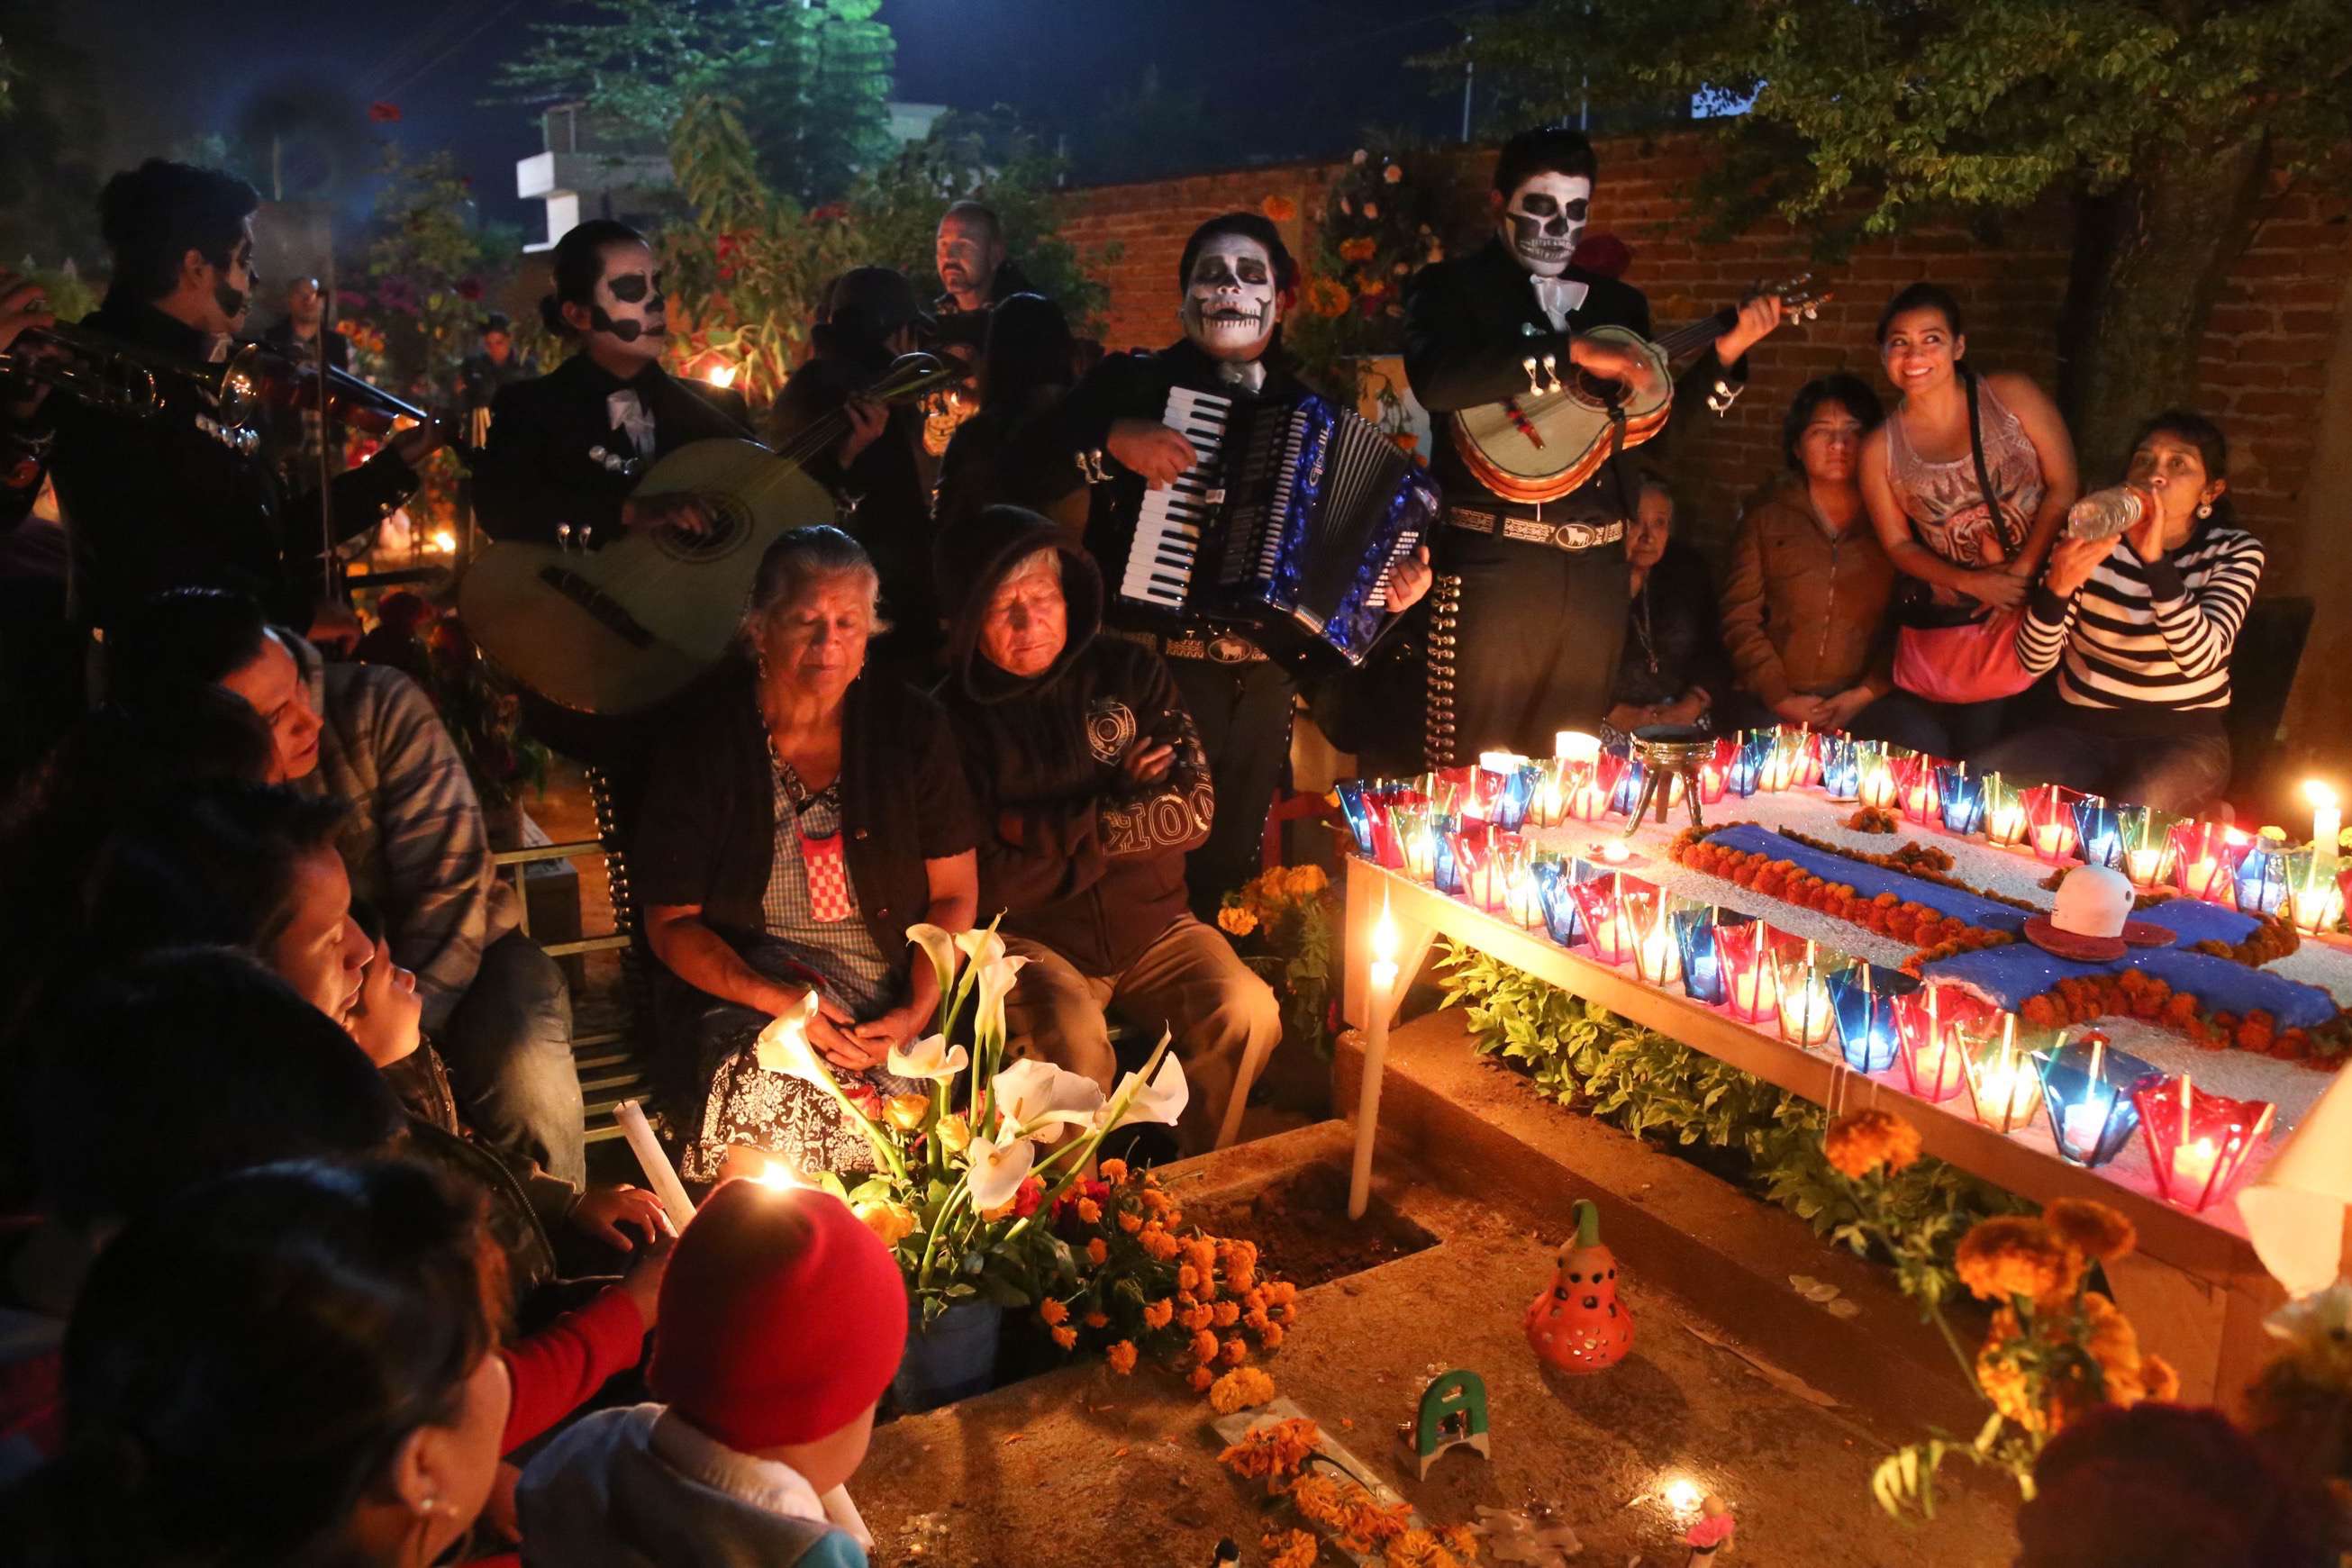 At the Santa Cruz Xoxocotlan Cemetery family, friends and musicians gather to remember a loved one and to celebrate life.